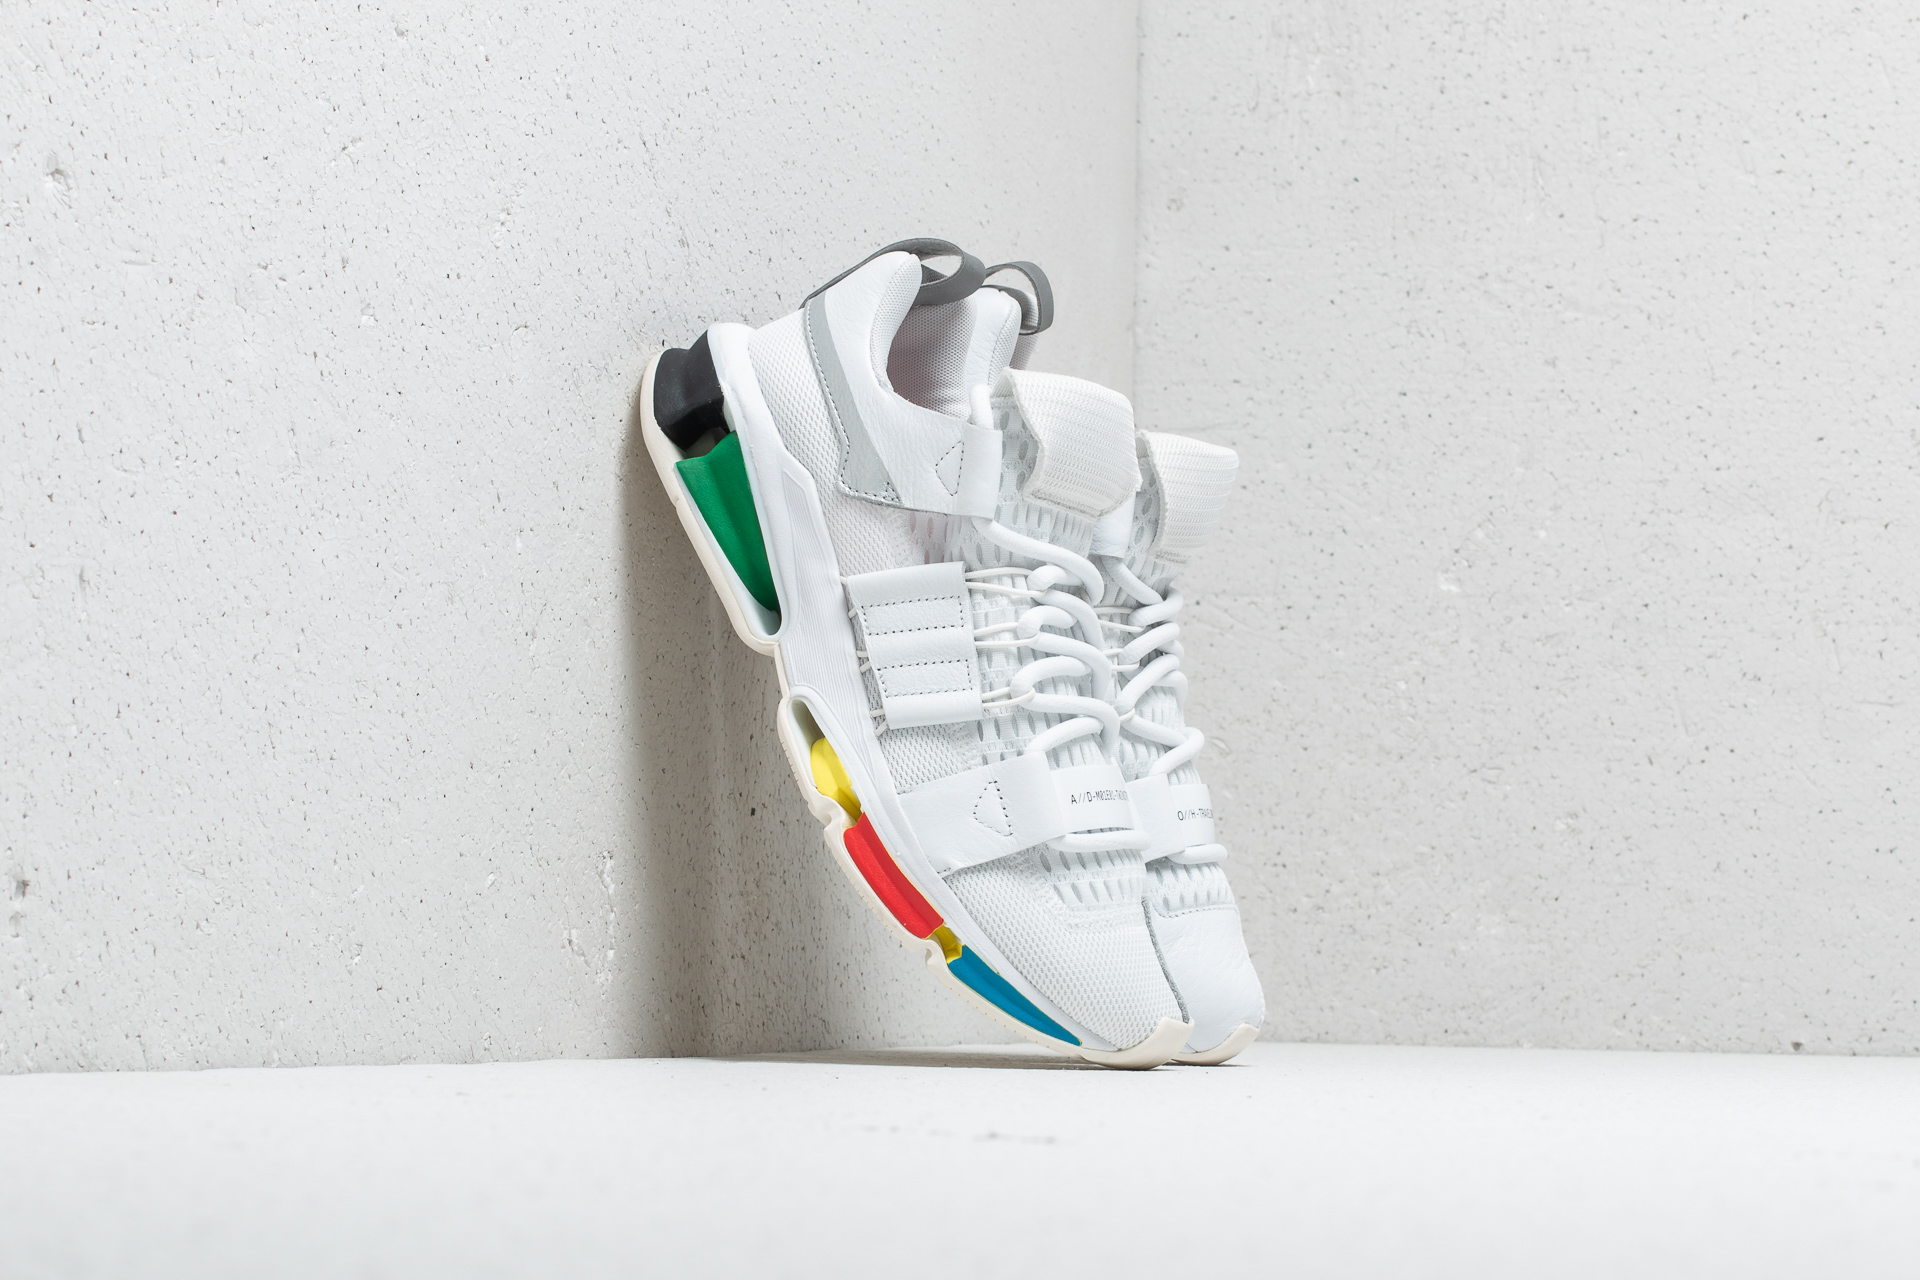 adidas x Oyster Holdings Twinstrike - BD7262 Cloud / Off White / Core Black - Footshop - Releases